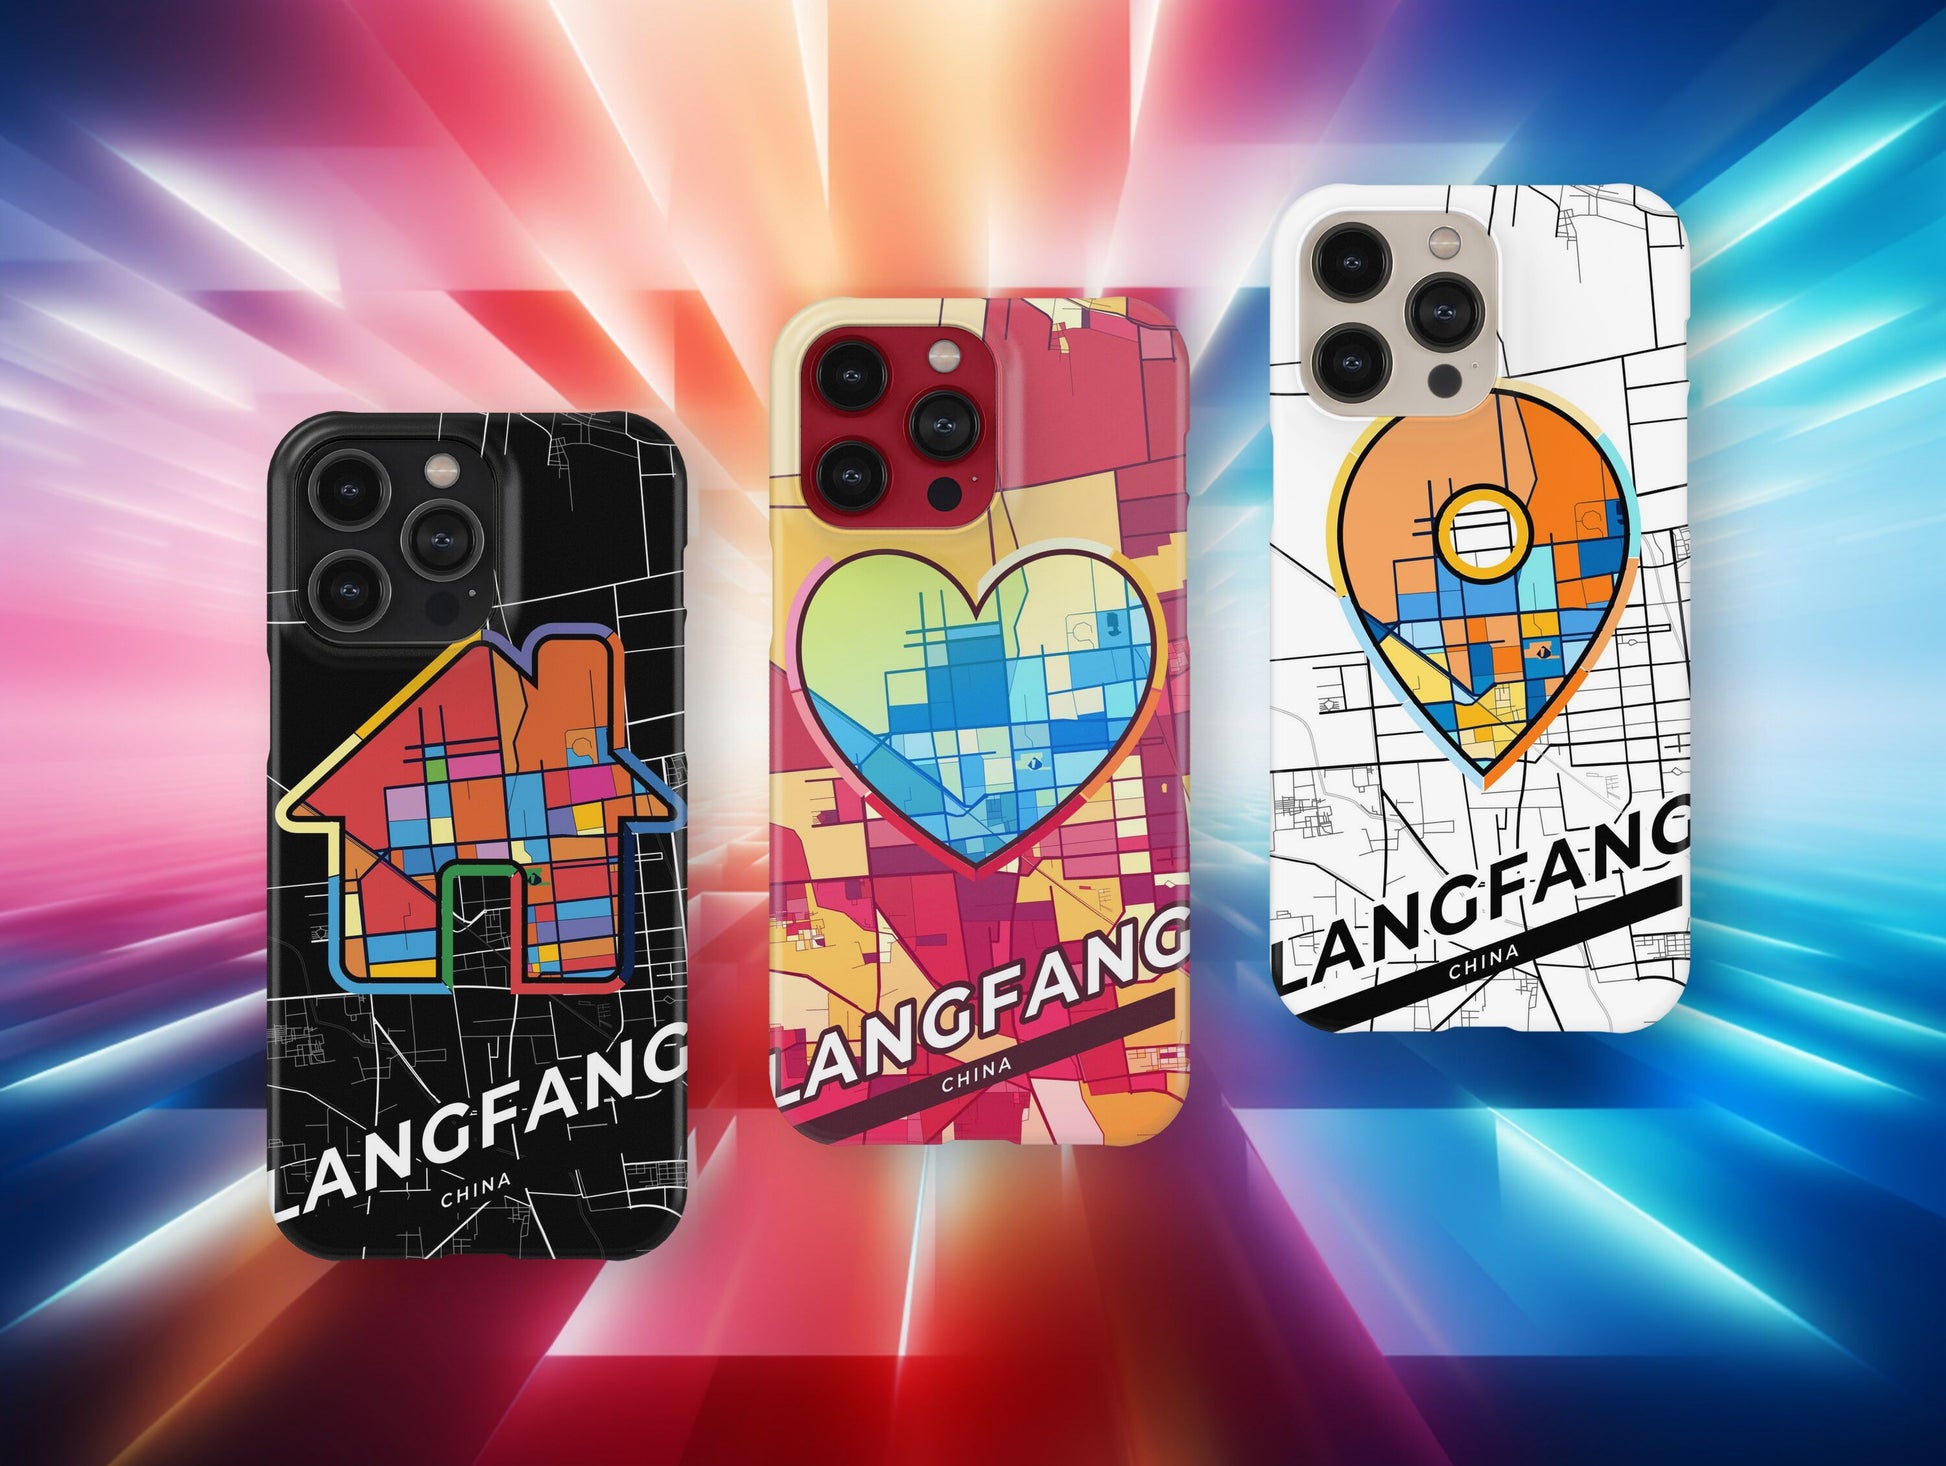 Langfang China slim phone case with colorful icon. Birthday, wedding or housewarming gift. Couple match cases.